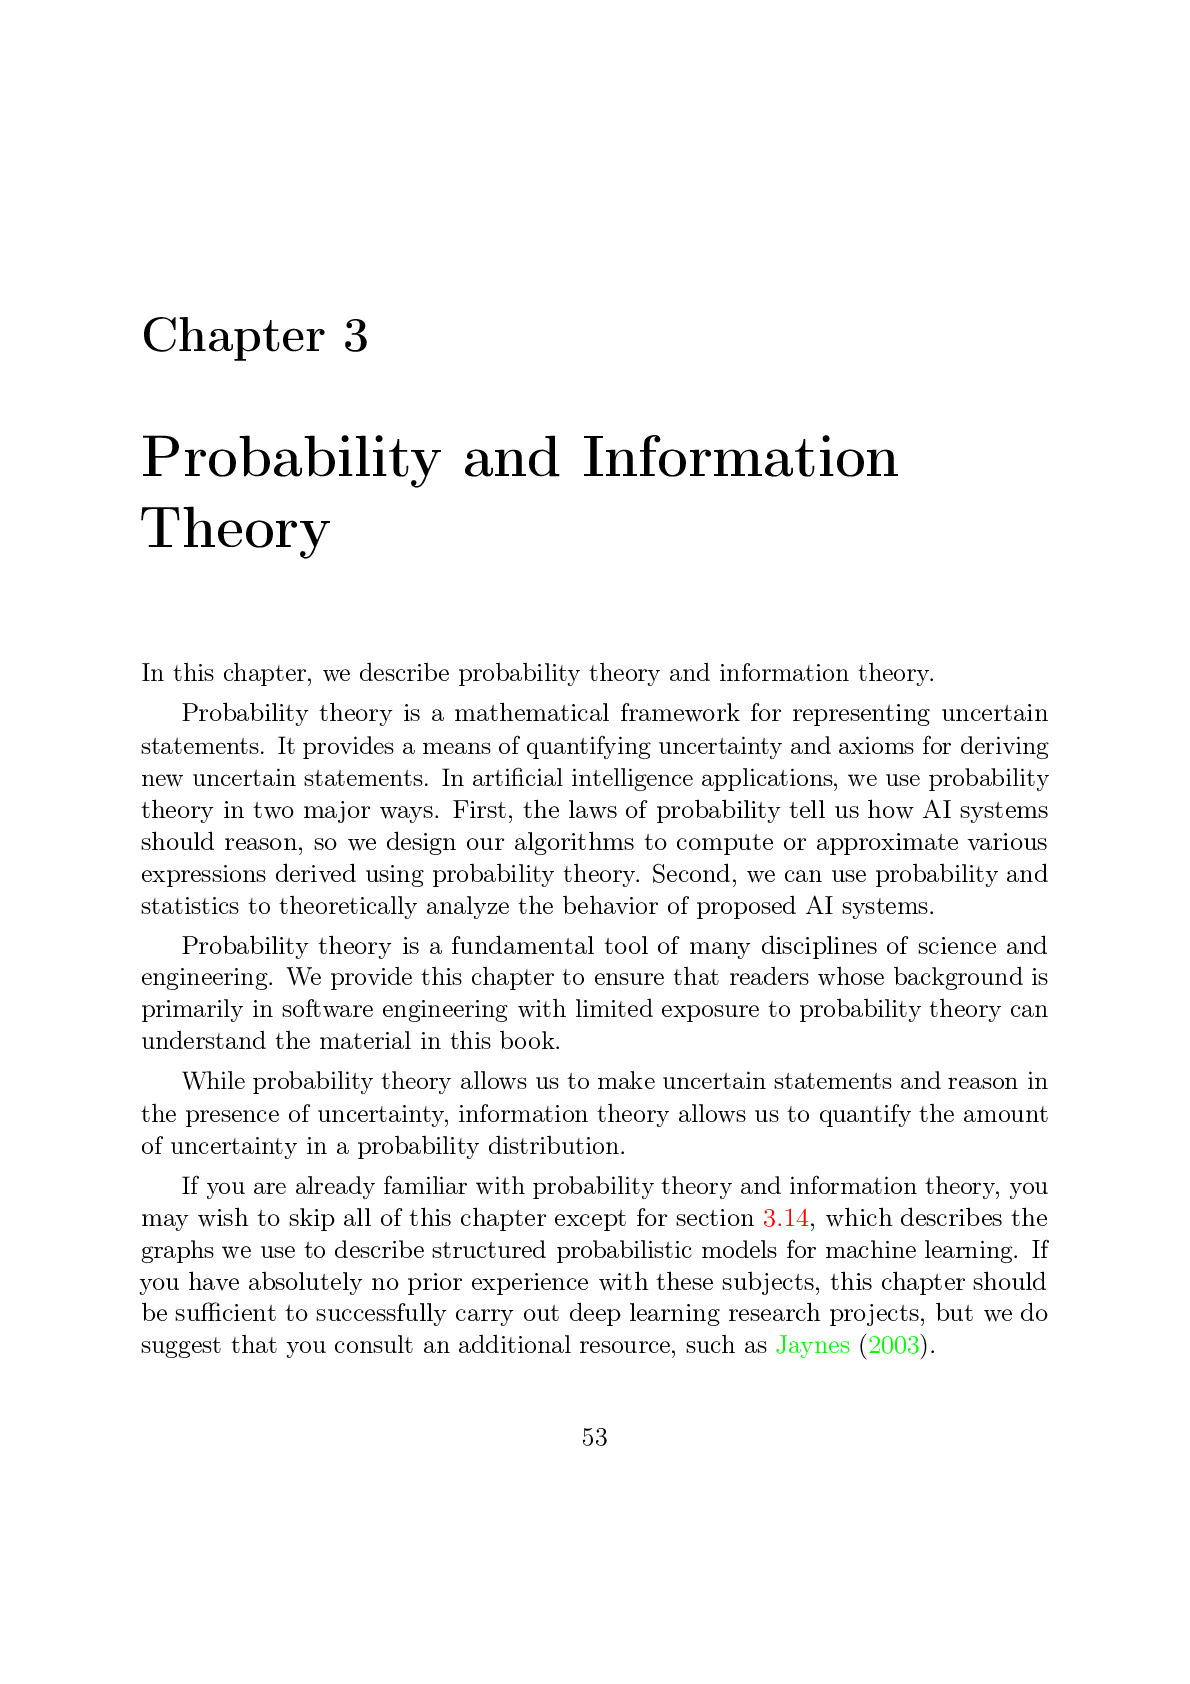 3 Probability and Information Theory